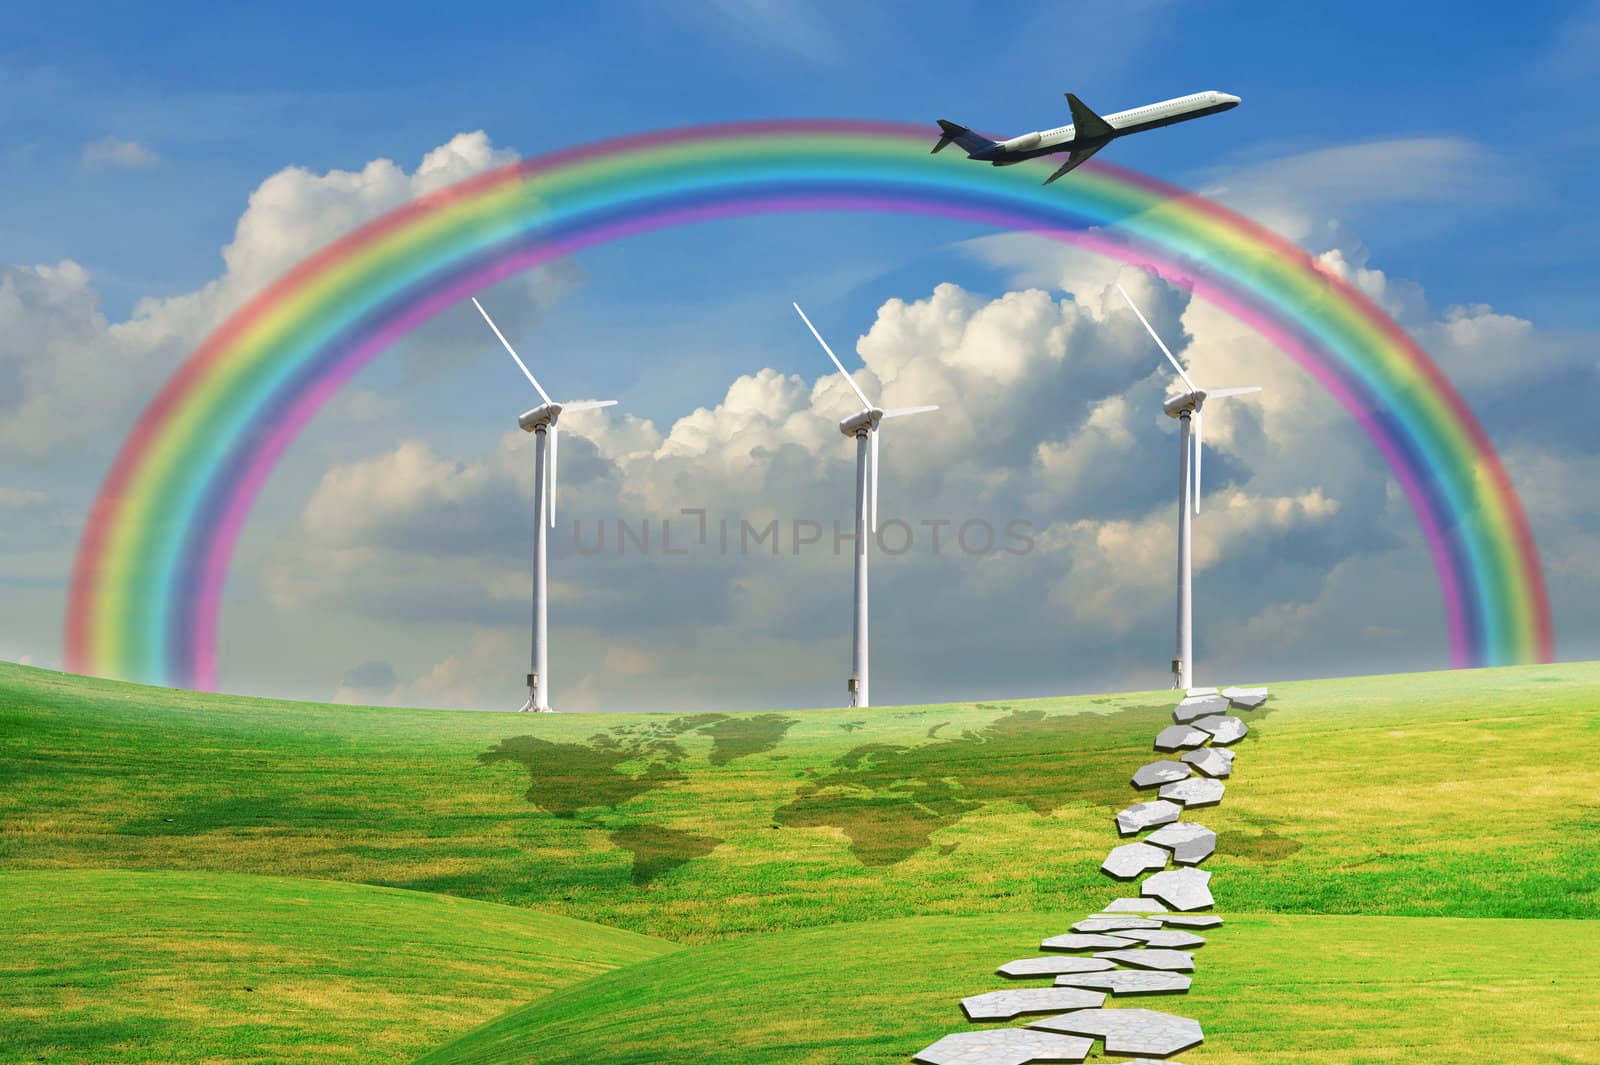 Airplane flying over green field with blue sky and turbine power generator